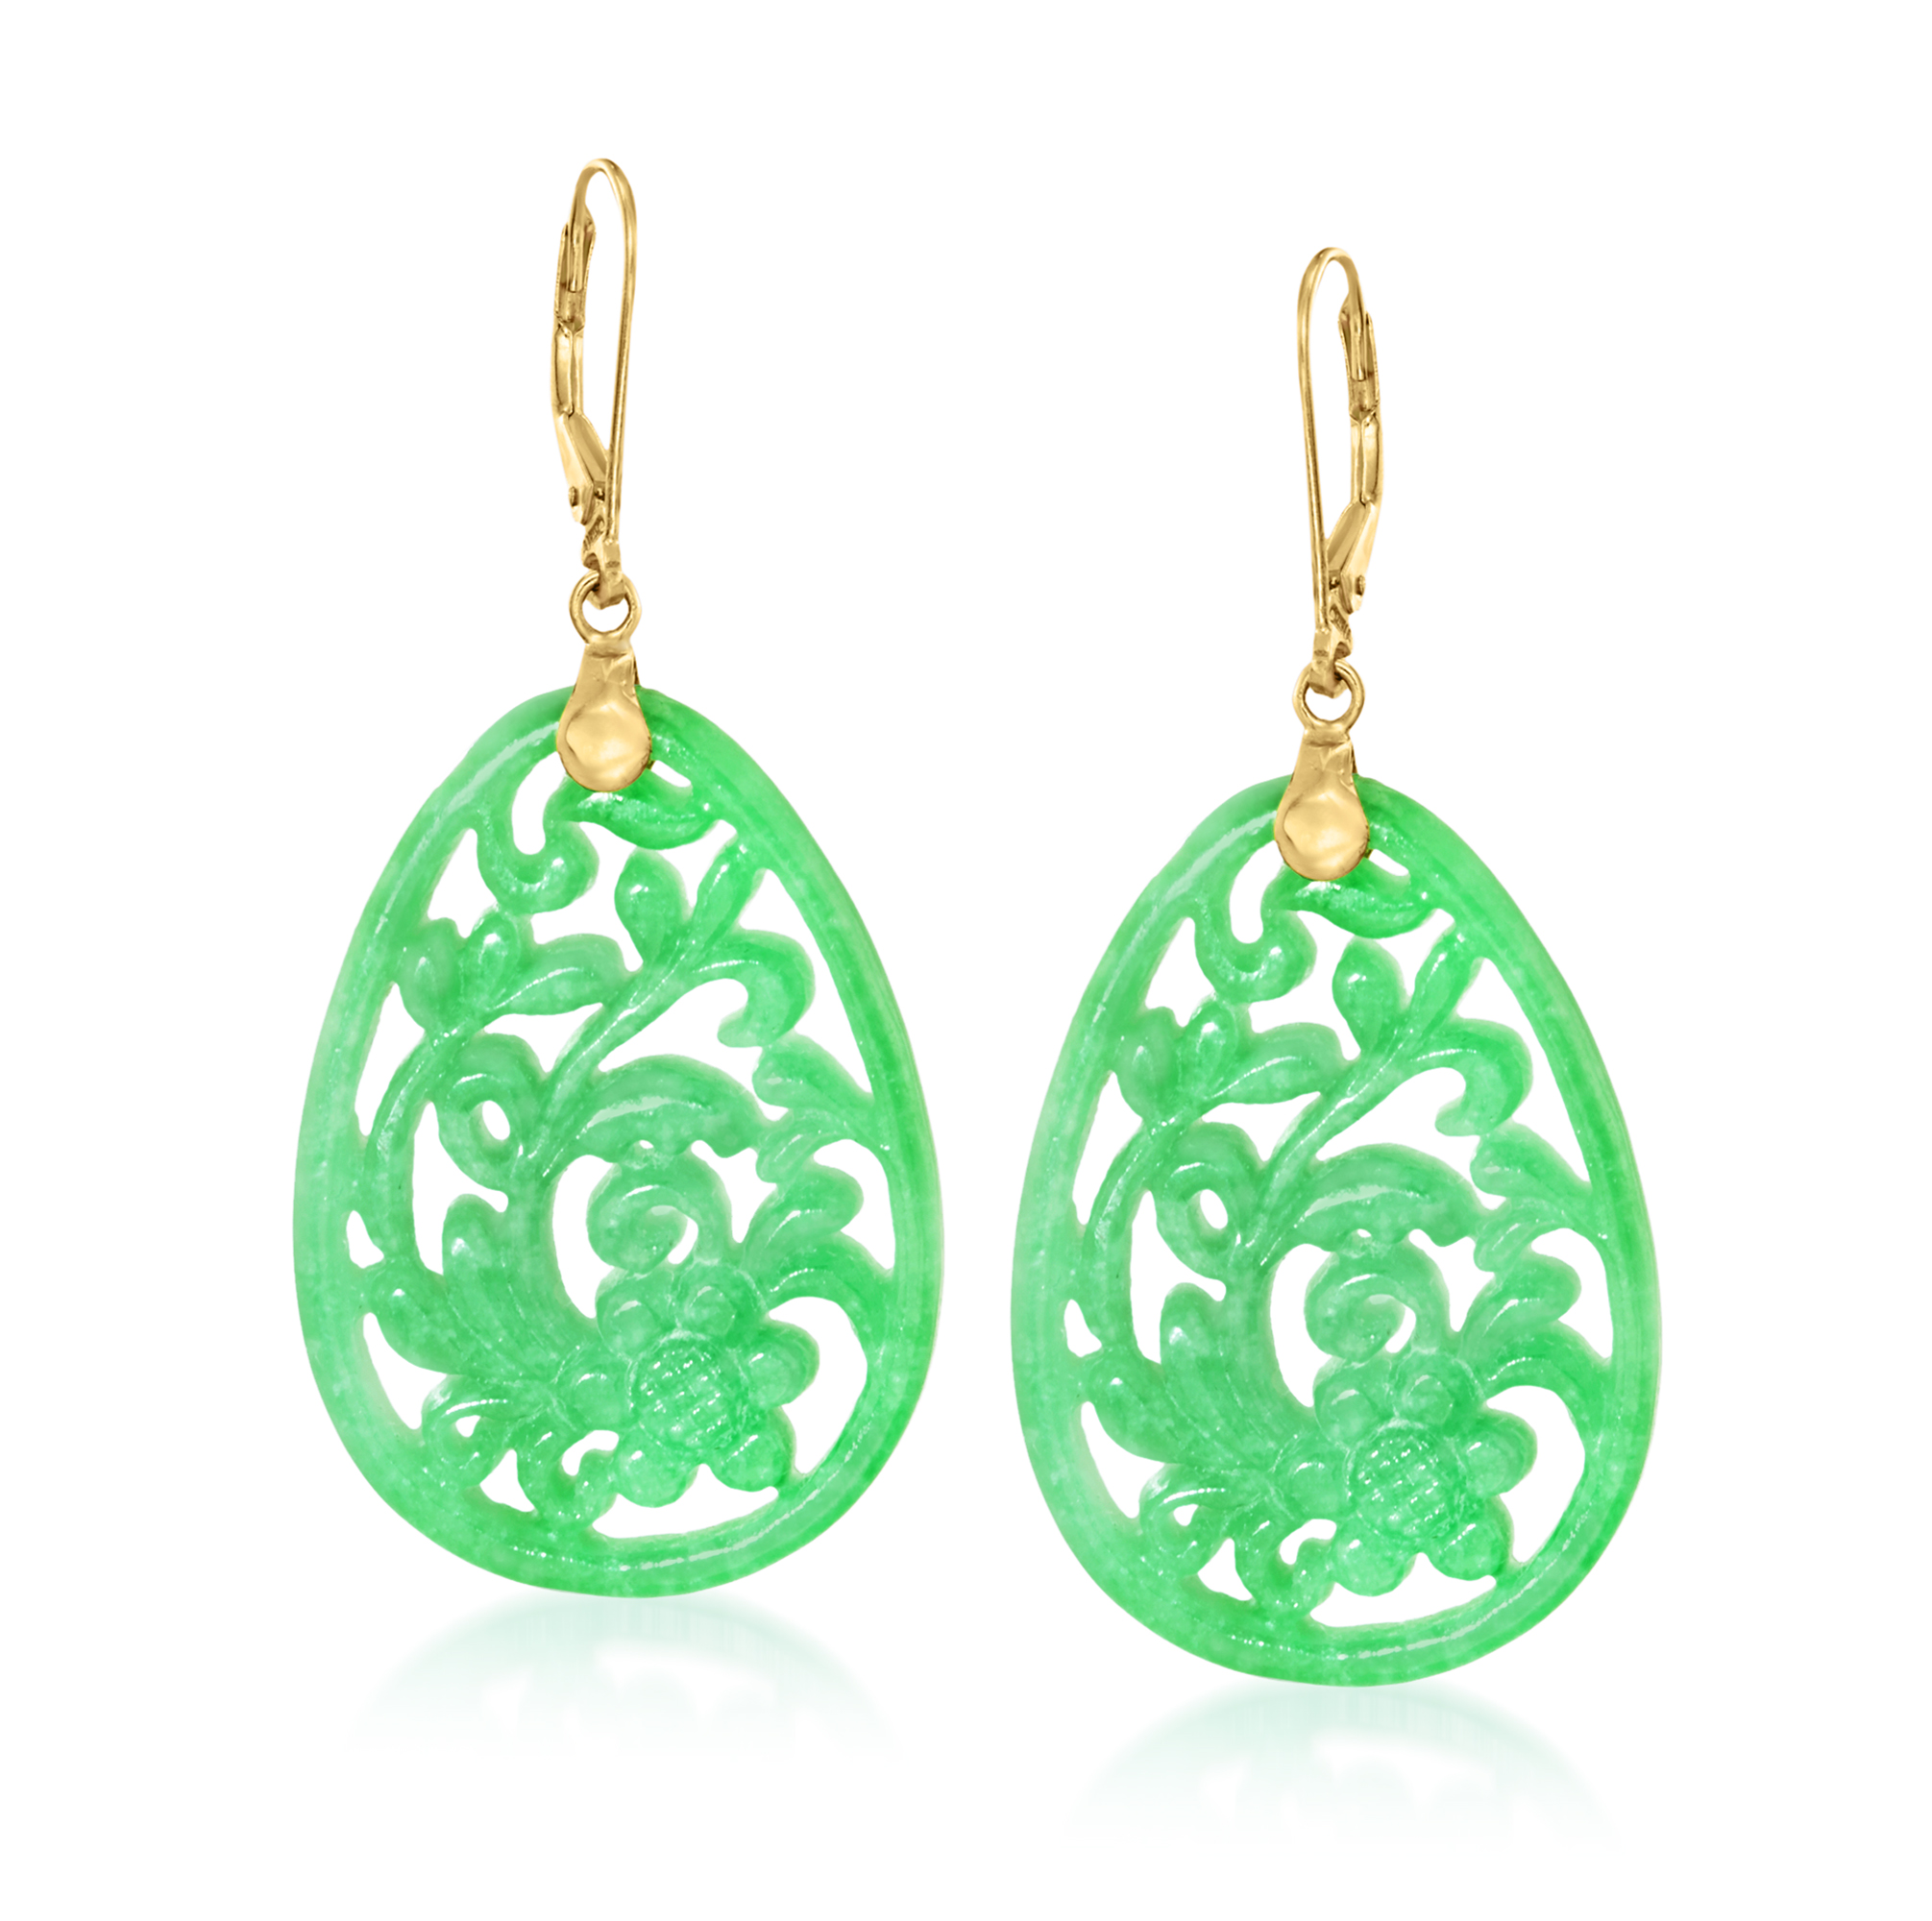 Carved Jade Floral Drop Earrings in 14kt Yellow Gold | Ross-Simons